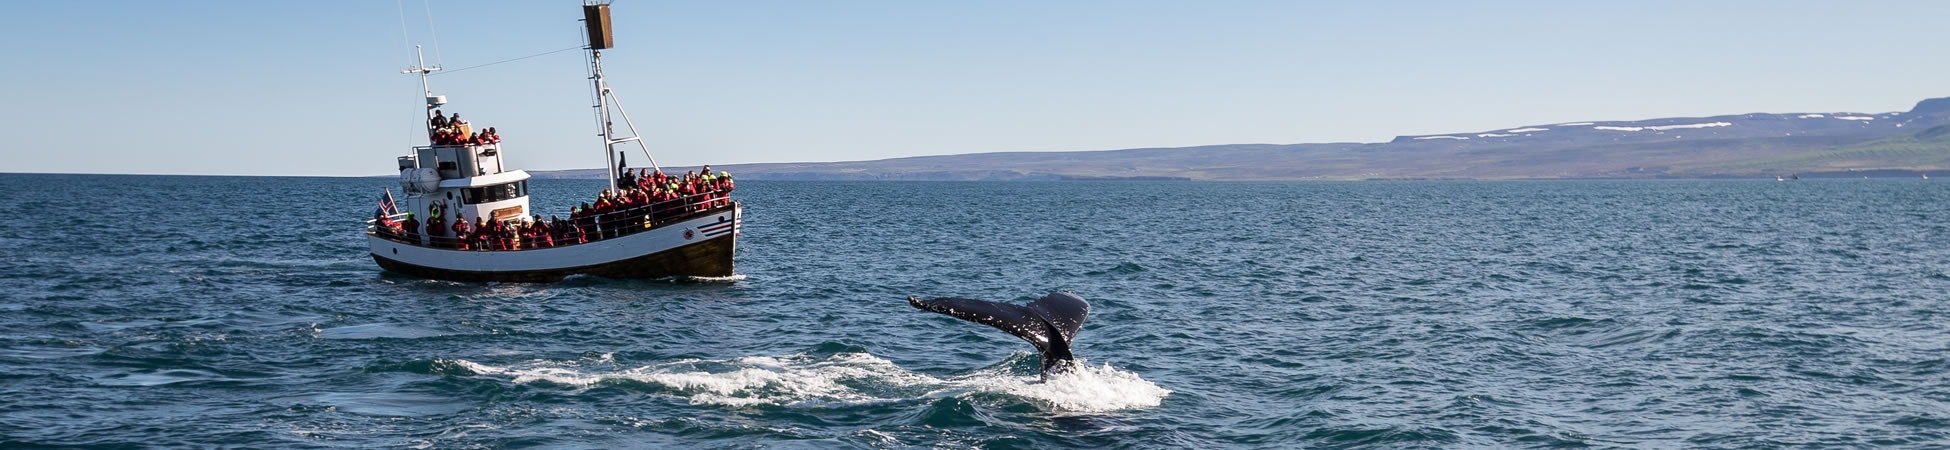 The Whales around Iceland